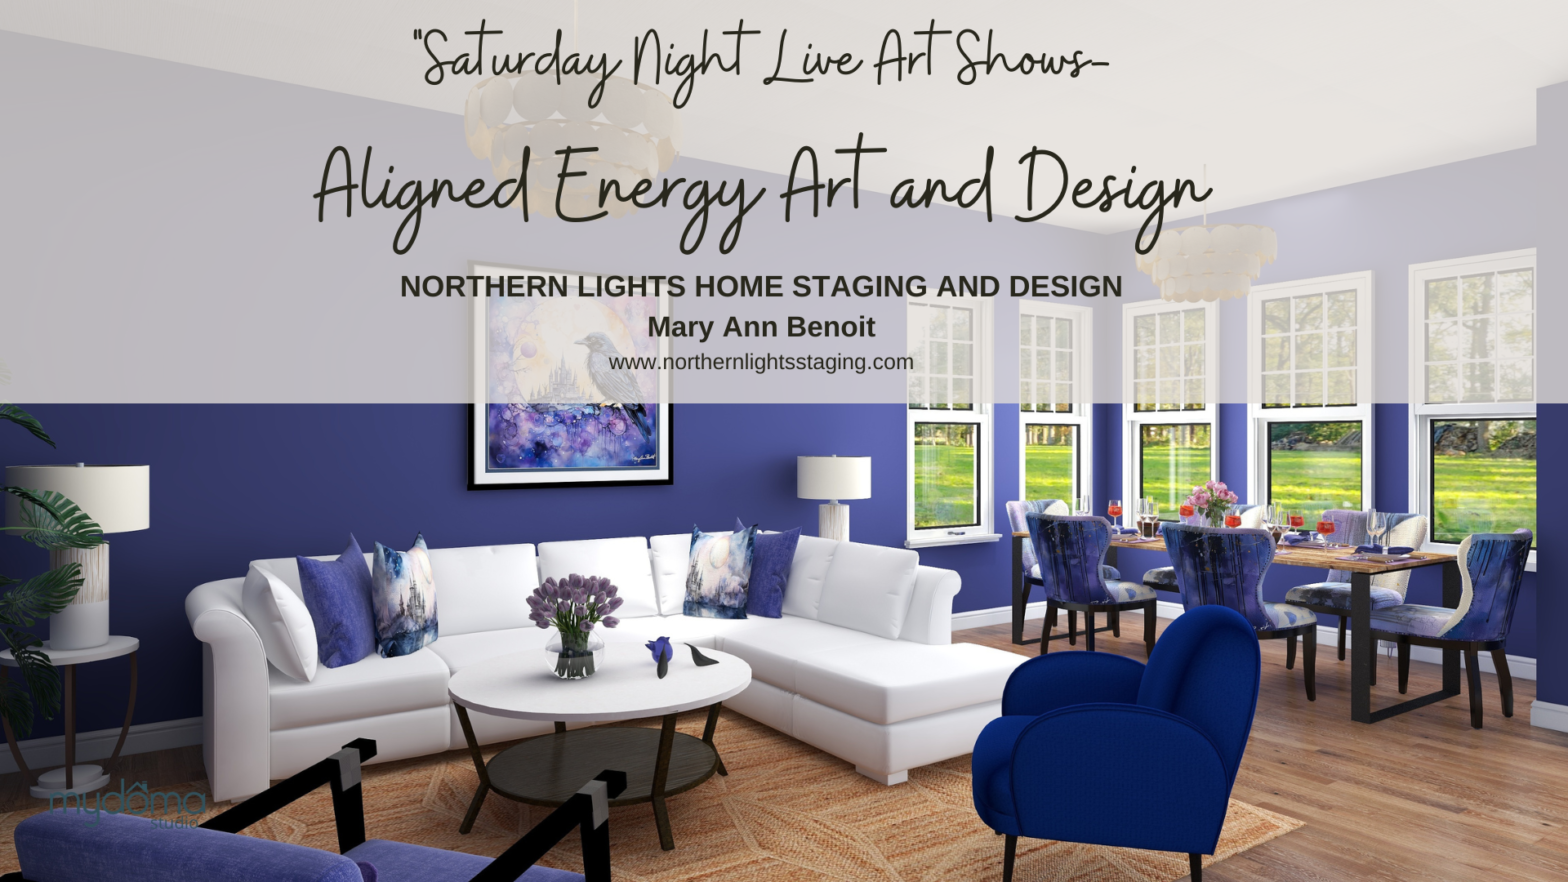 Saturday Night Live Art Shows Playlist by Northern Lights Home Staging and Design